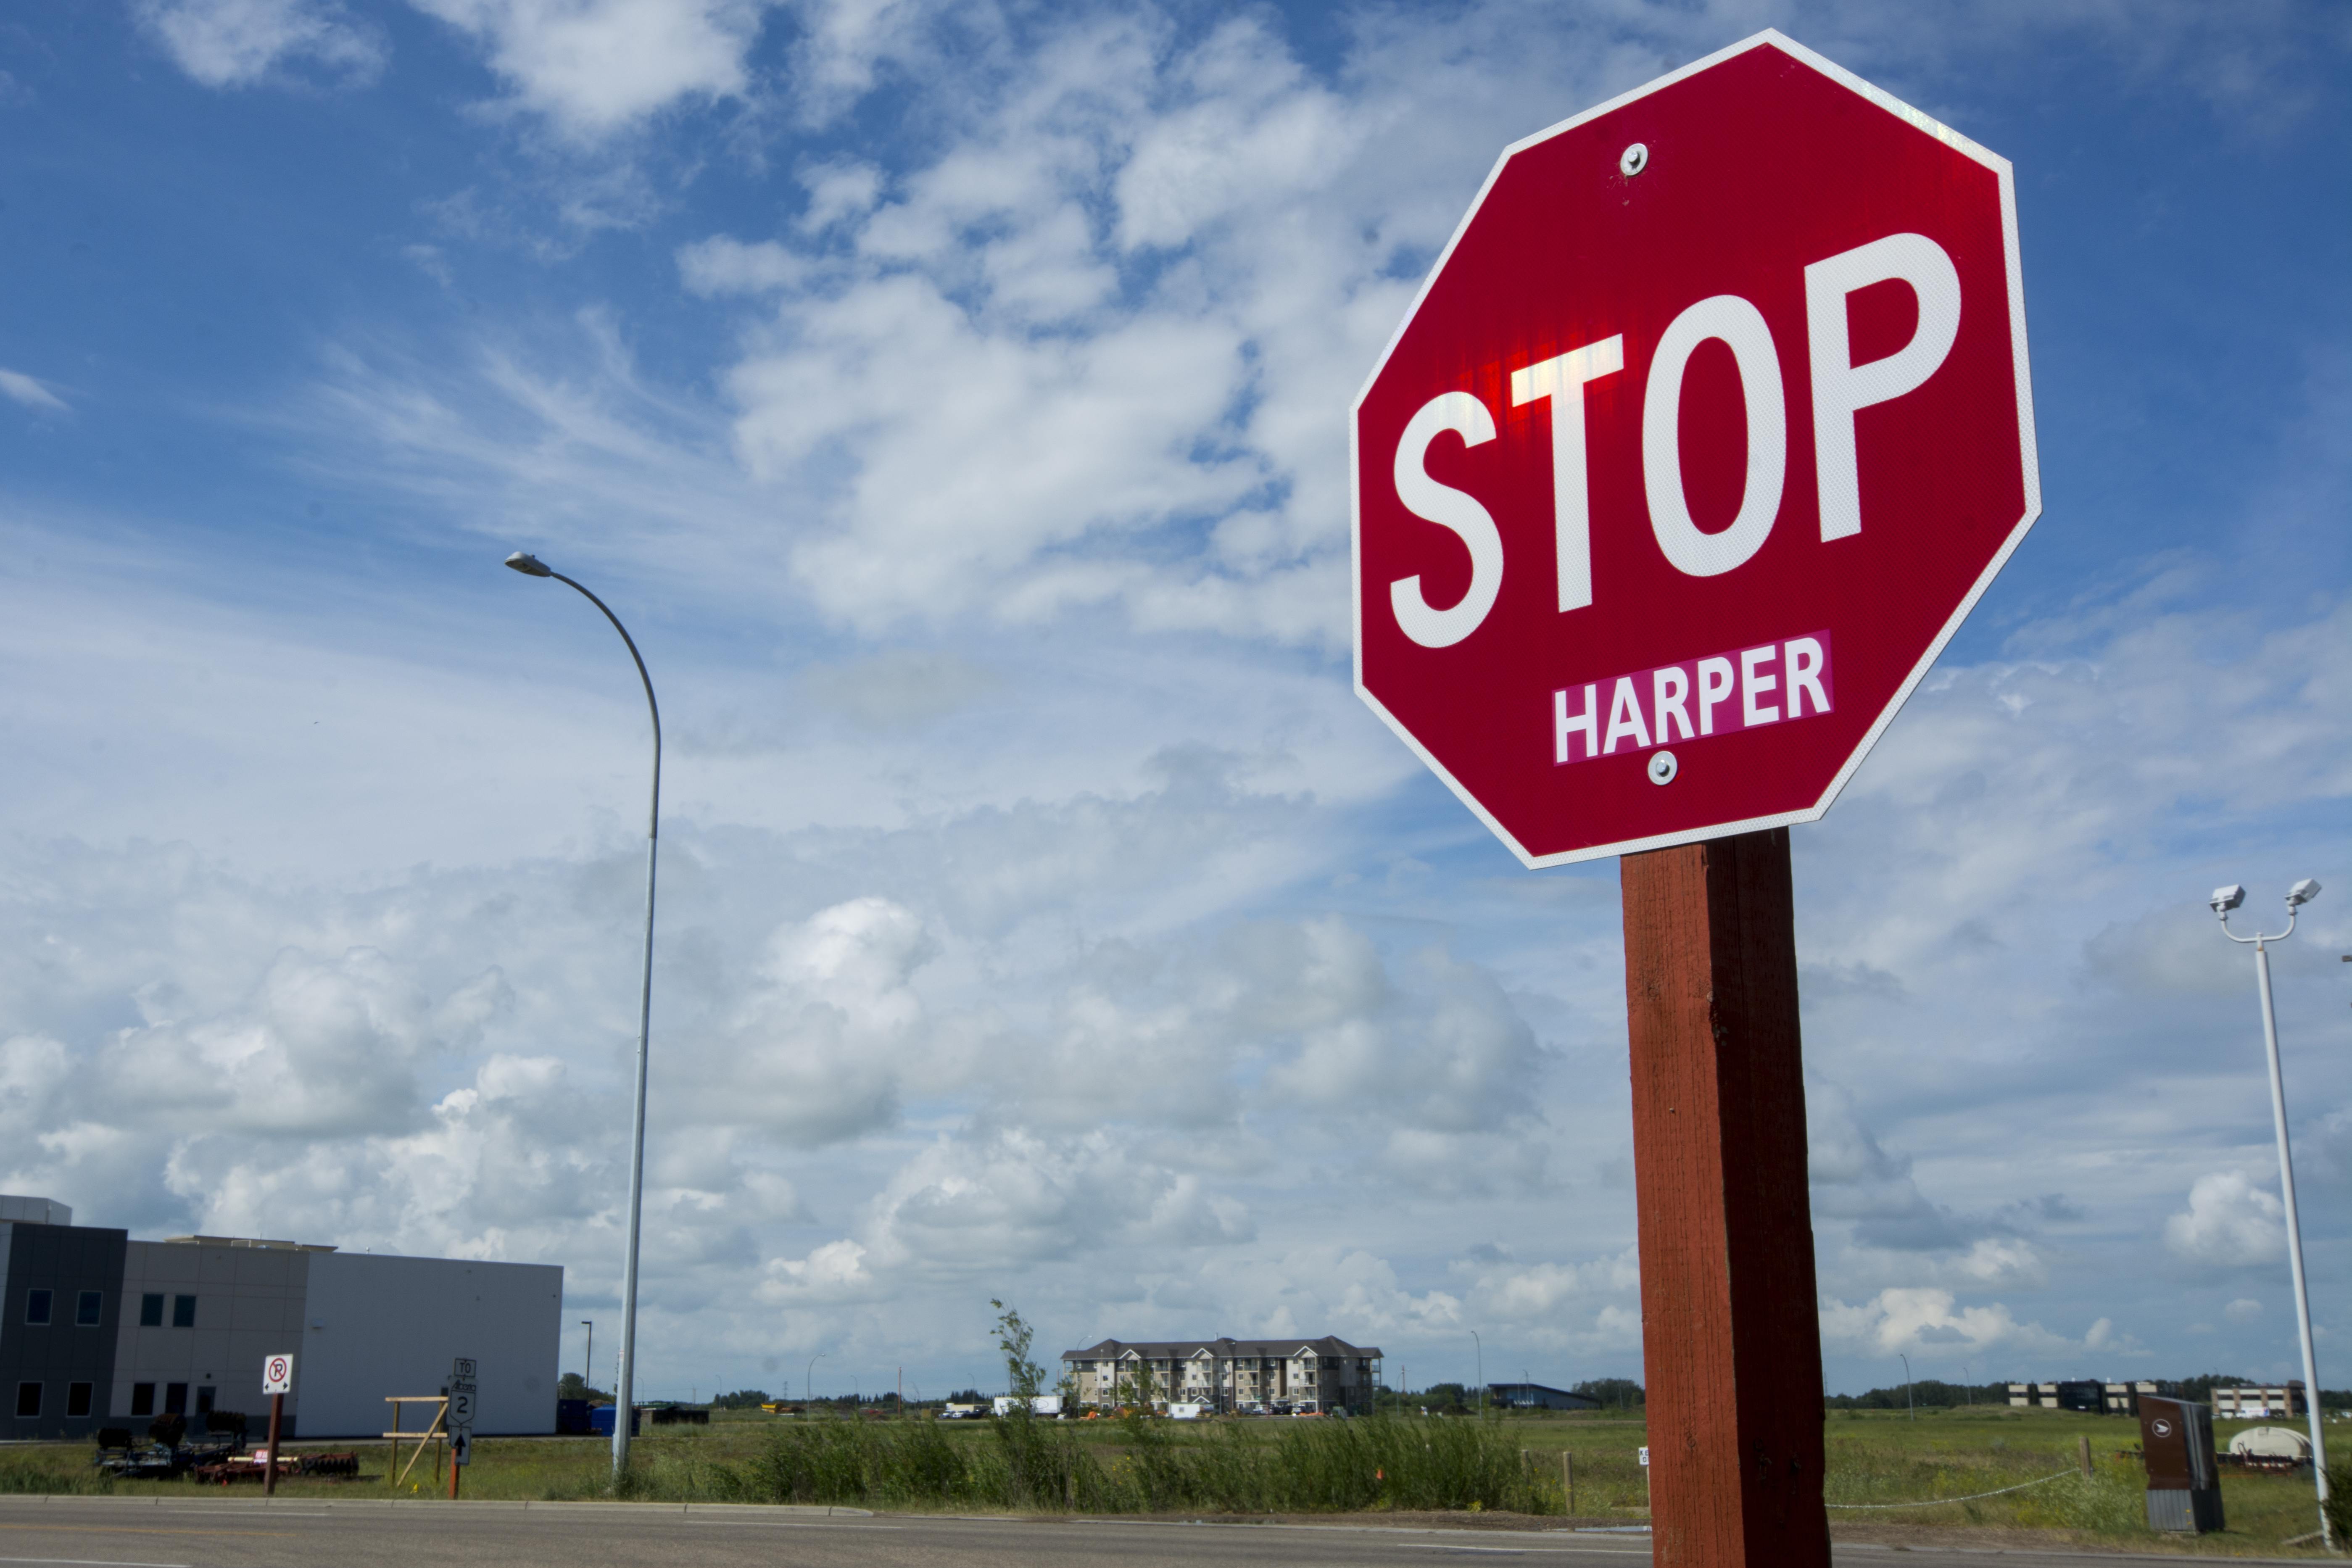 STOP HARPER - #StopHarper stickers have been popping up on ‘Stop’ signs around the City as well as in Red Deer County on Gasoline Alley where this sticker was spotted.